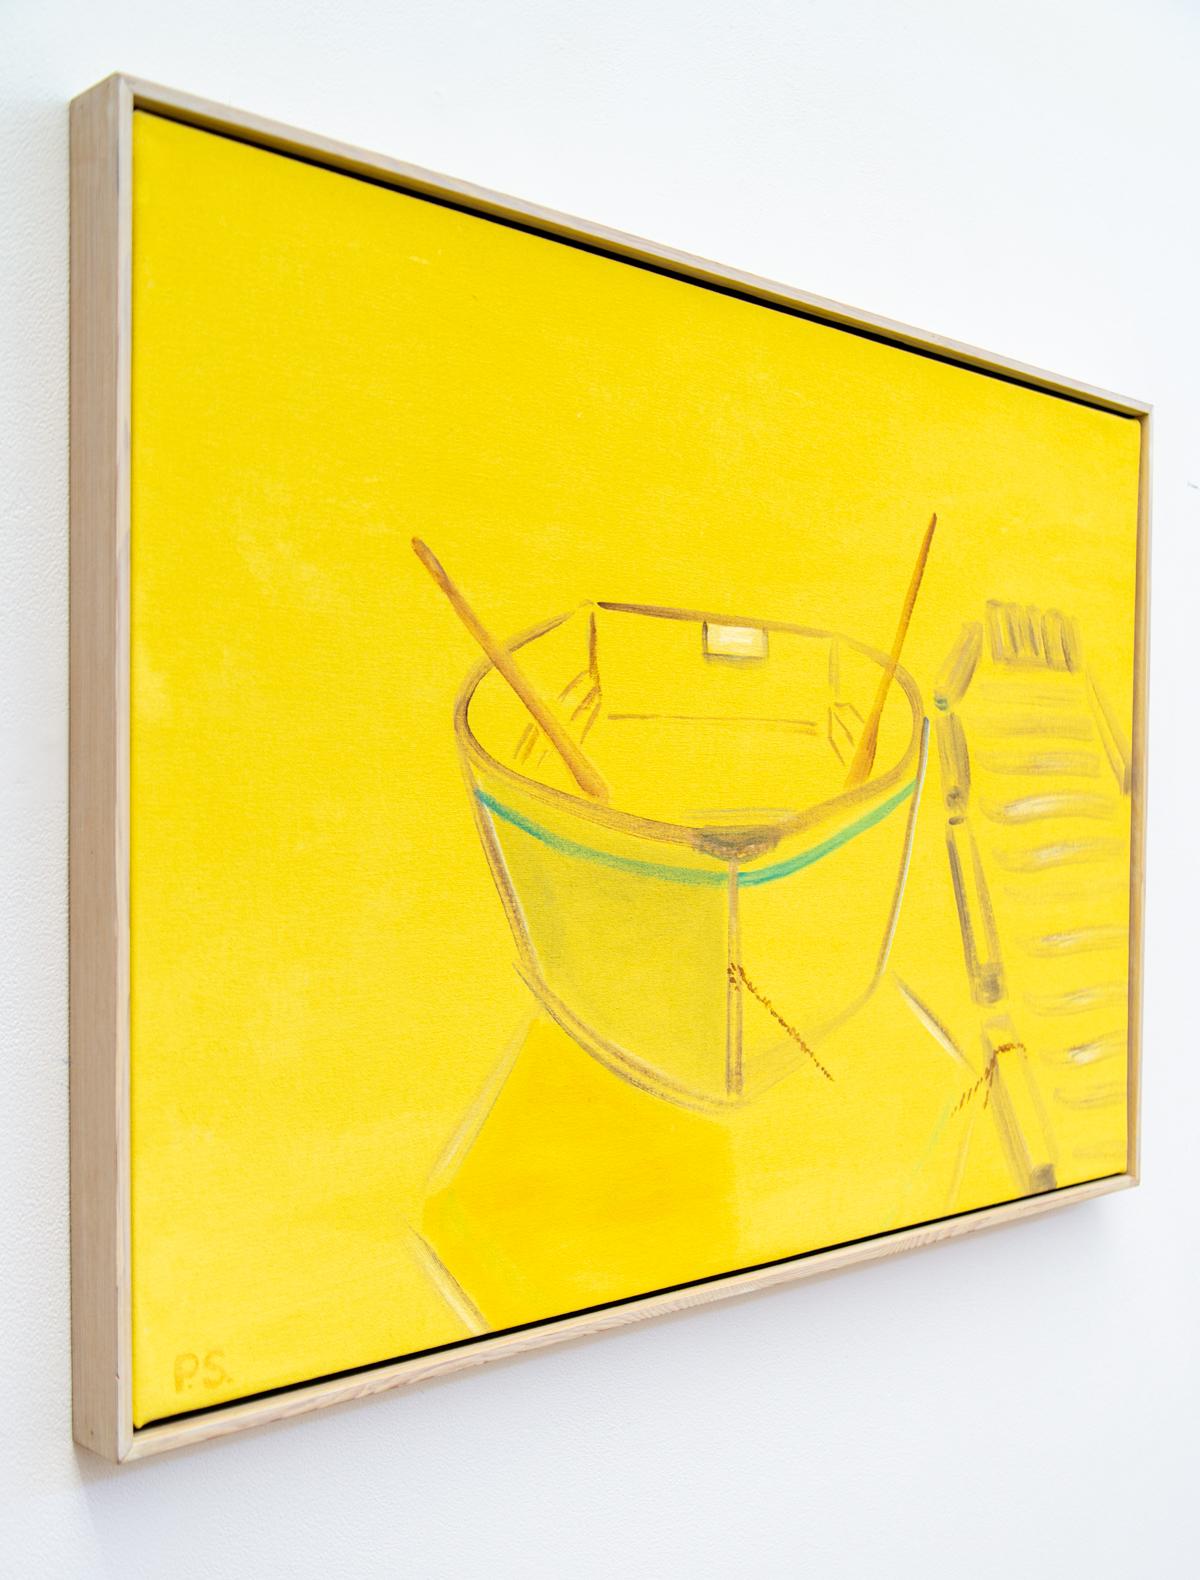 Boat 6 - bright, yellow, minimalist, abstracted waterscape, acrylic on canvas - Contemporary Painting by Pat Service